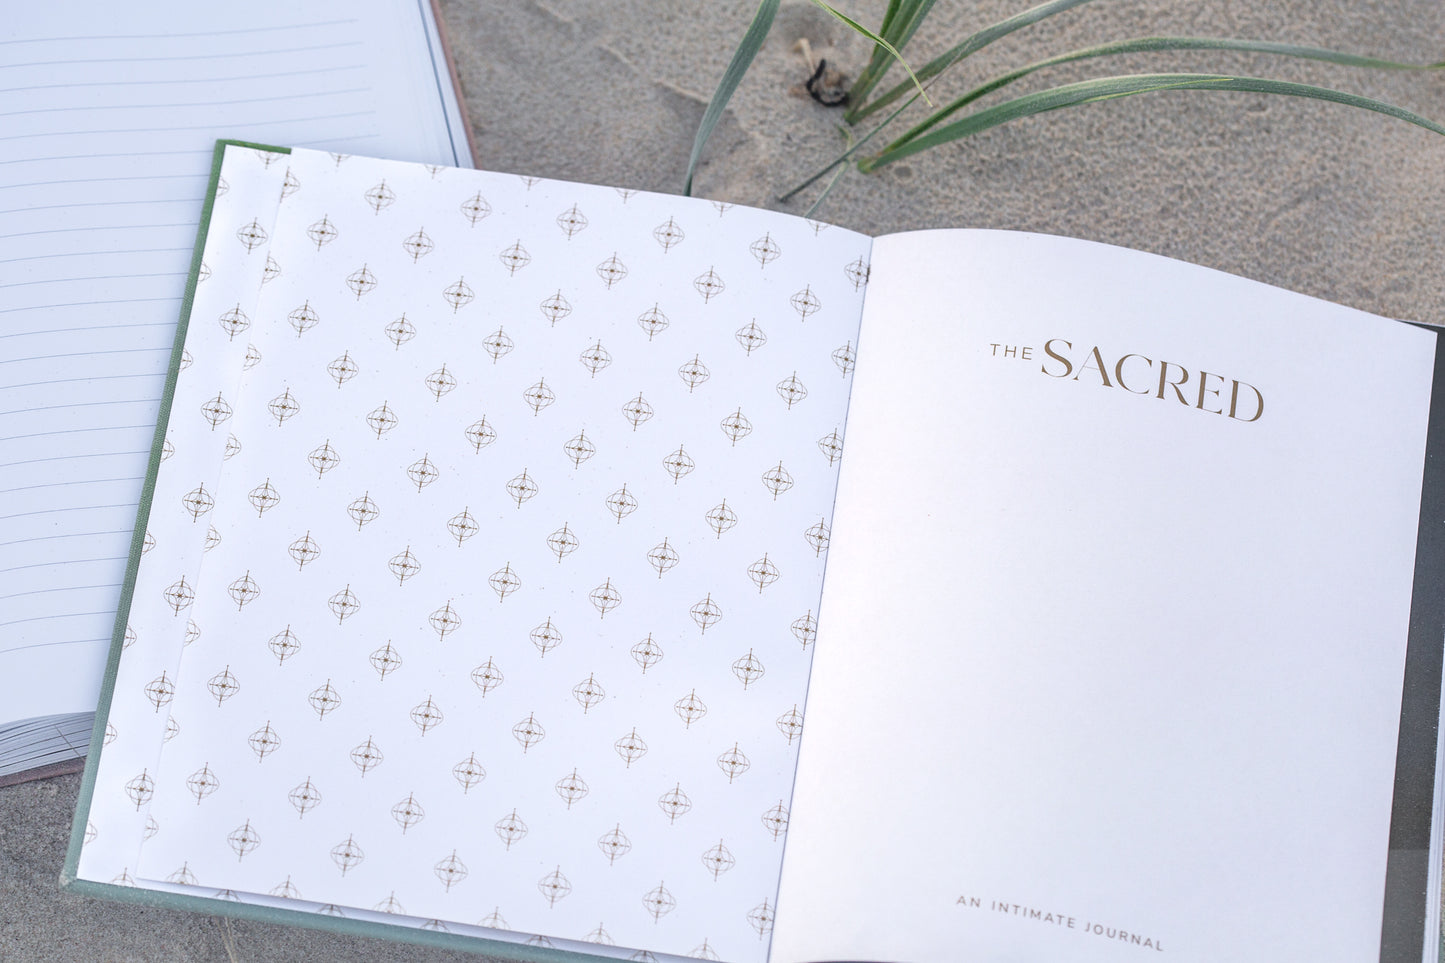 TheSacred ~ An Intimate Journal